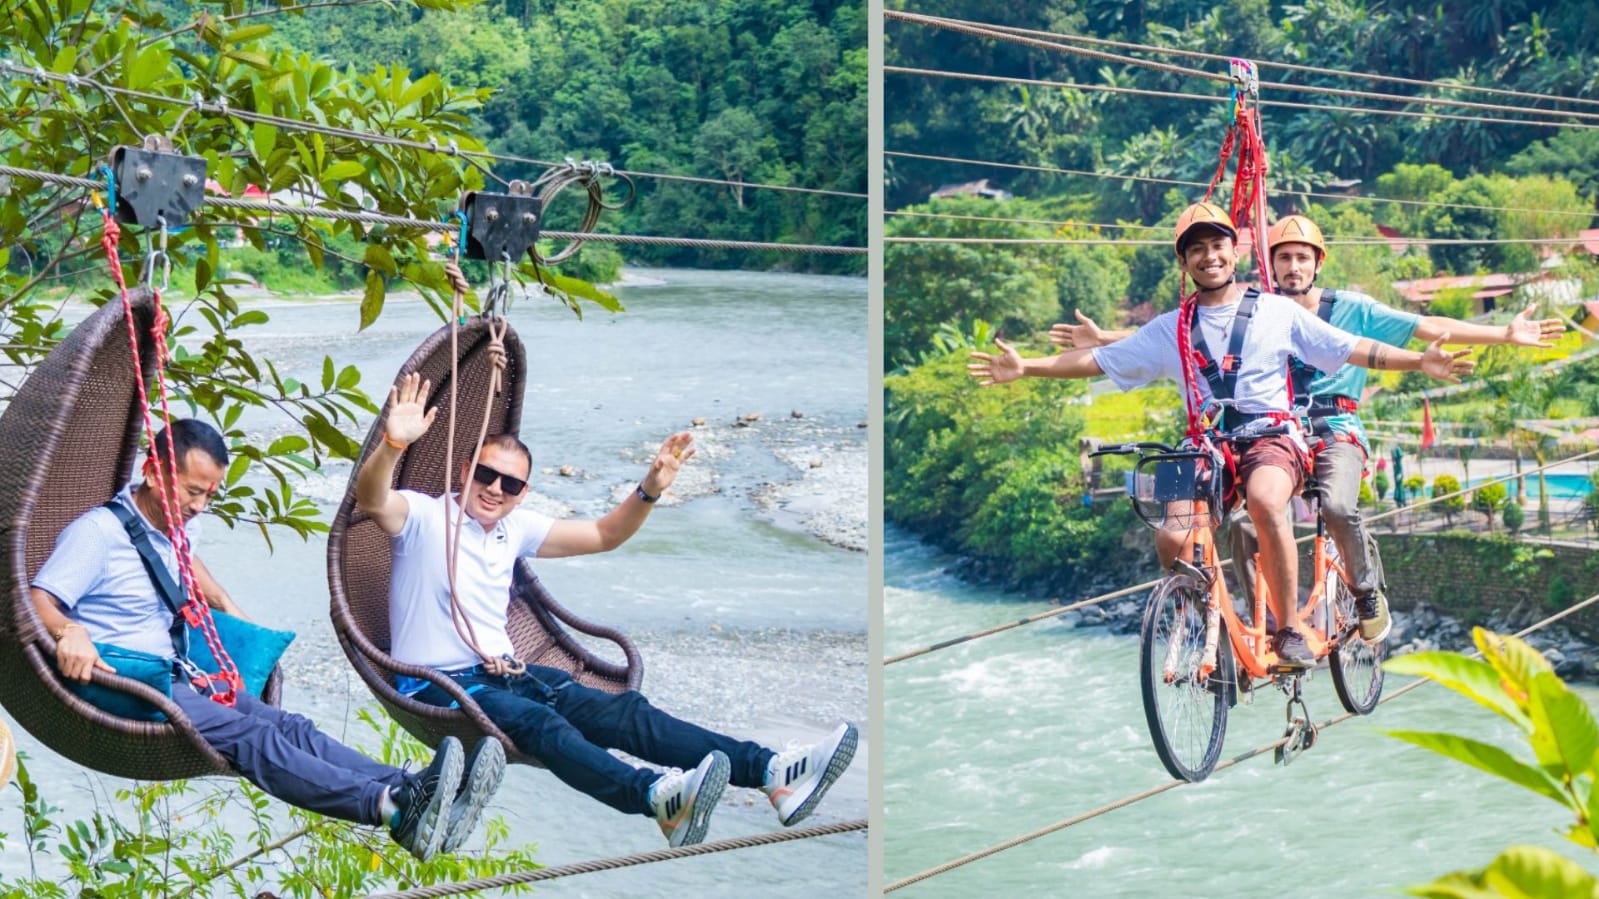 Hammock cable car, 360-degree swing, and tandem sky rope cycle launched in Sukute to draw more tourists